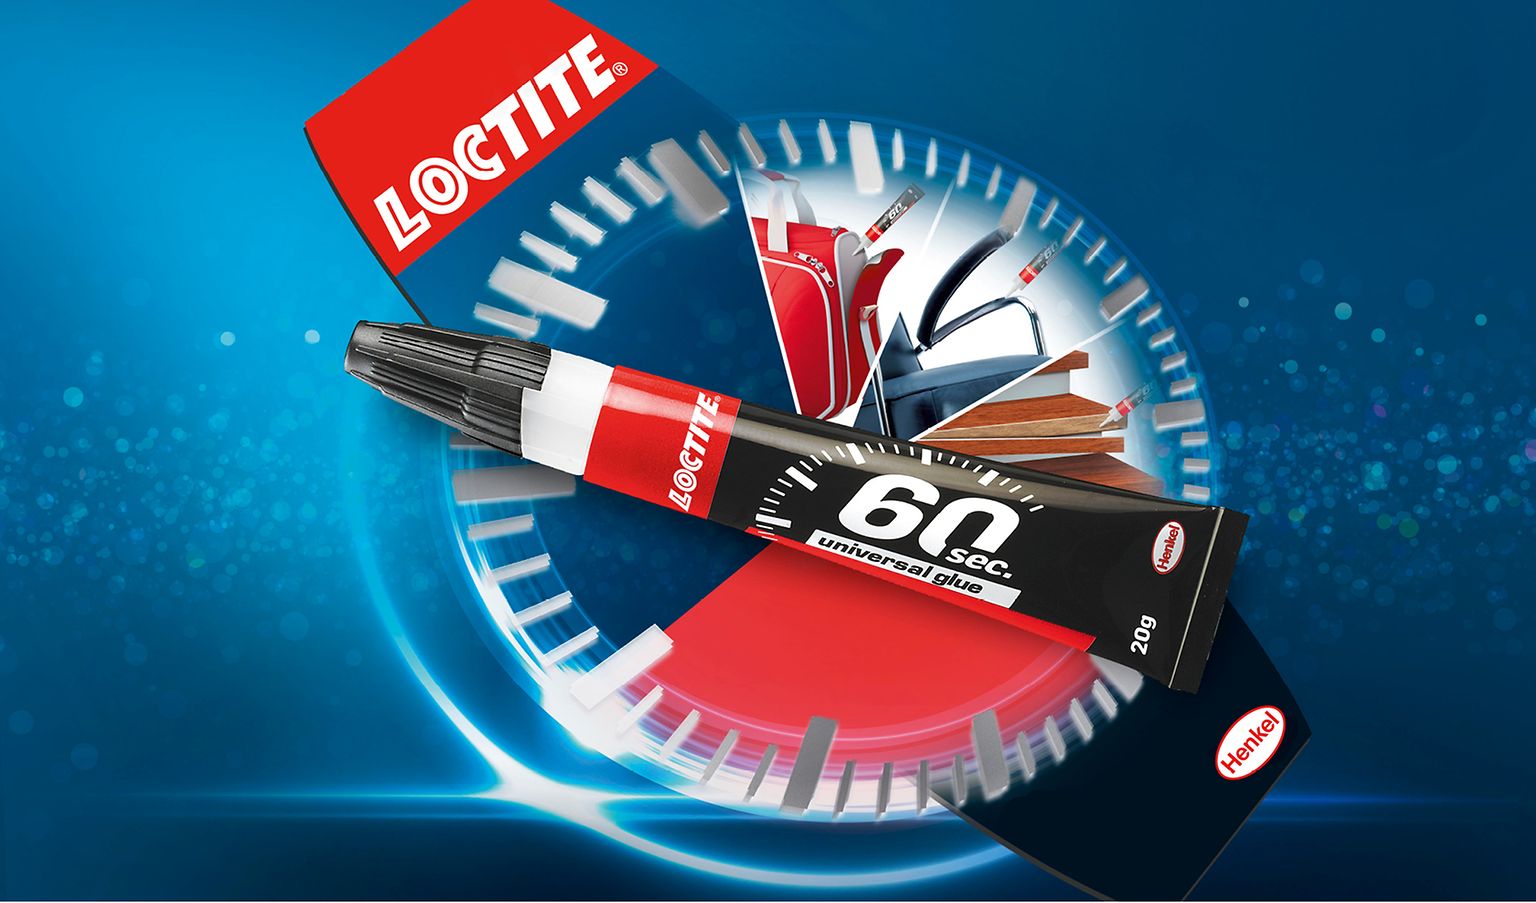 
Loctite 60 Sec. Universal Glue is the first all-purpose glue from Loctite that facilitates all kinds of household repairs in only 60 seconds. 